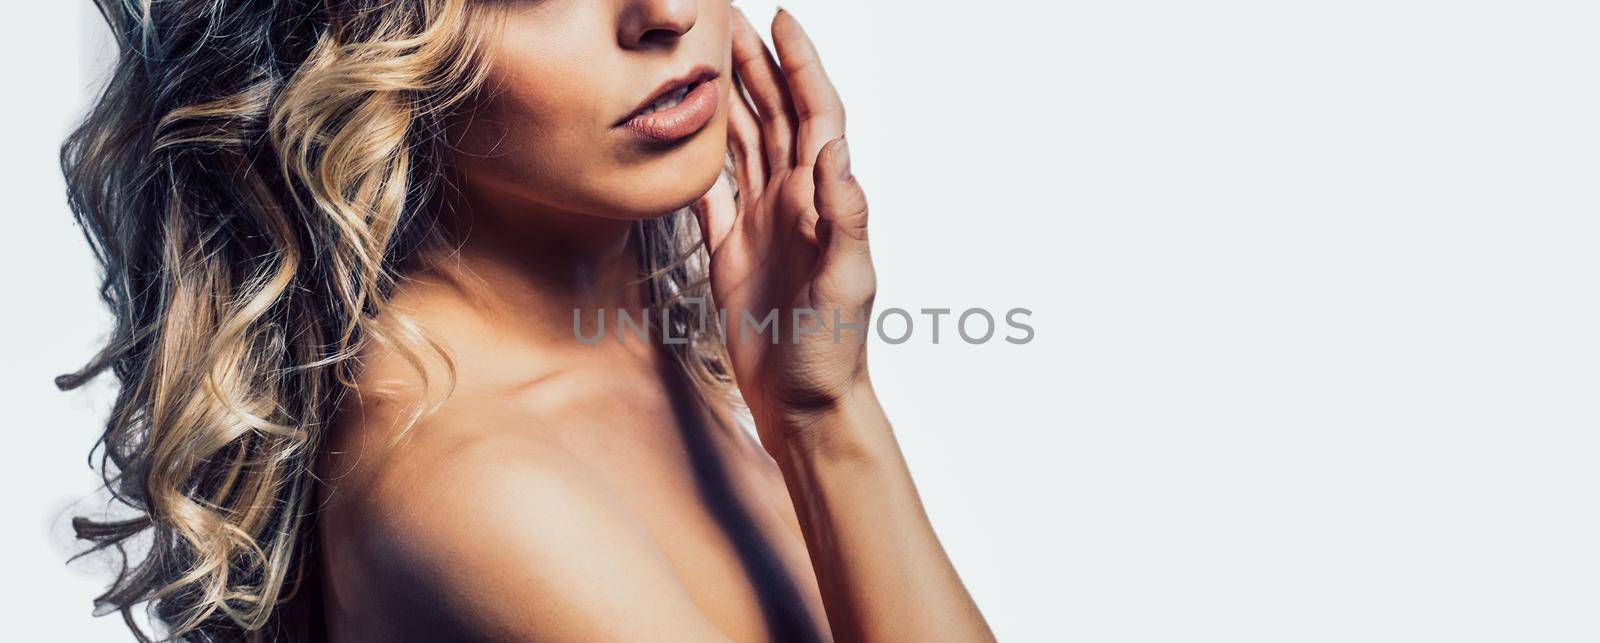 Beautiful girl model on a white background holding his hand to his face